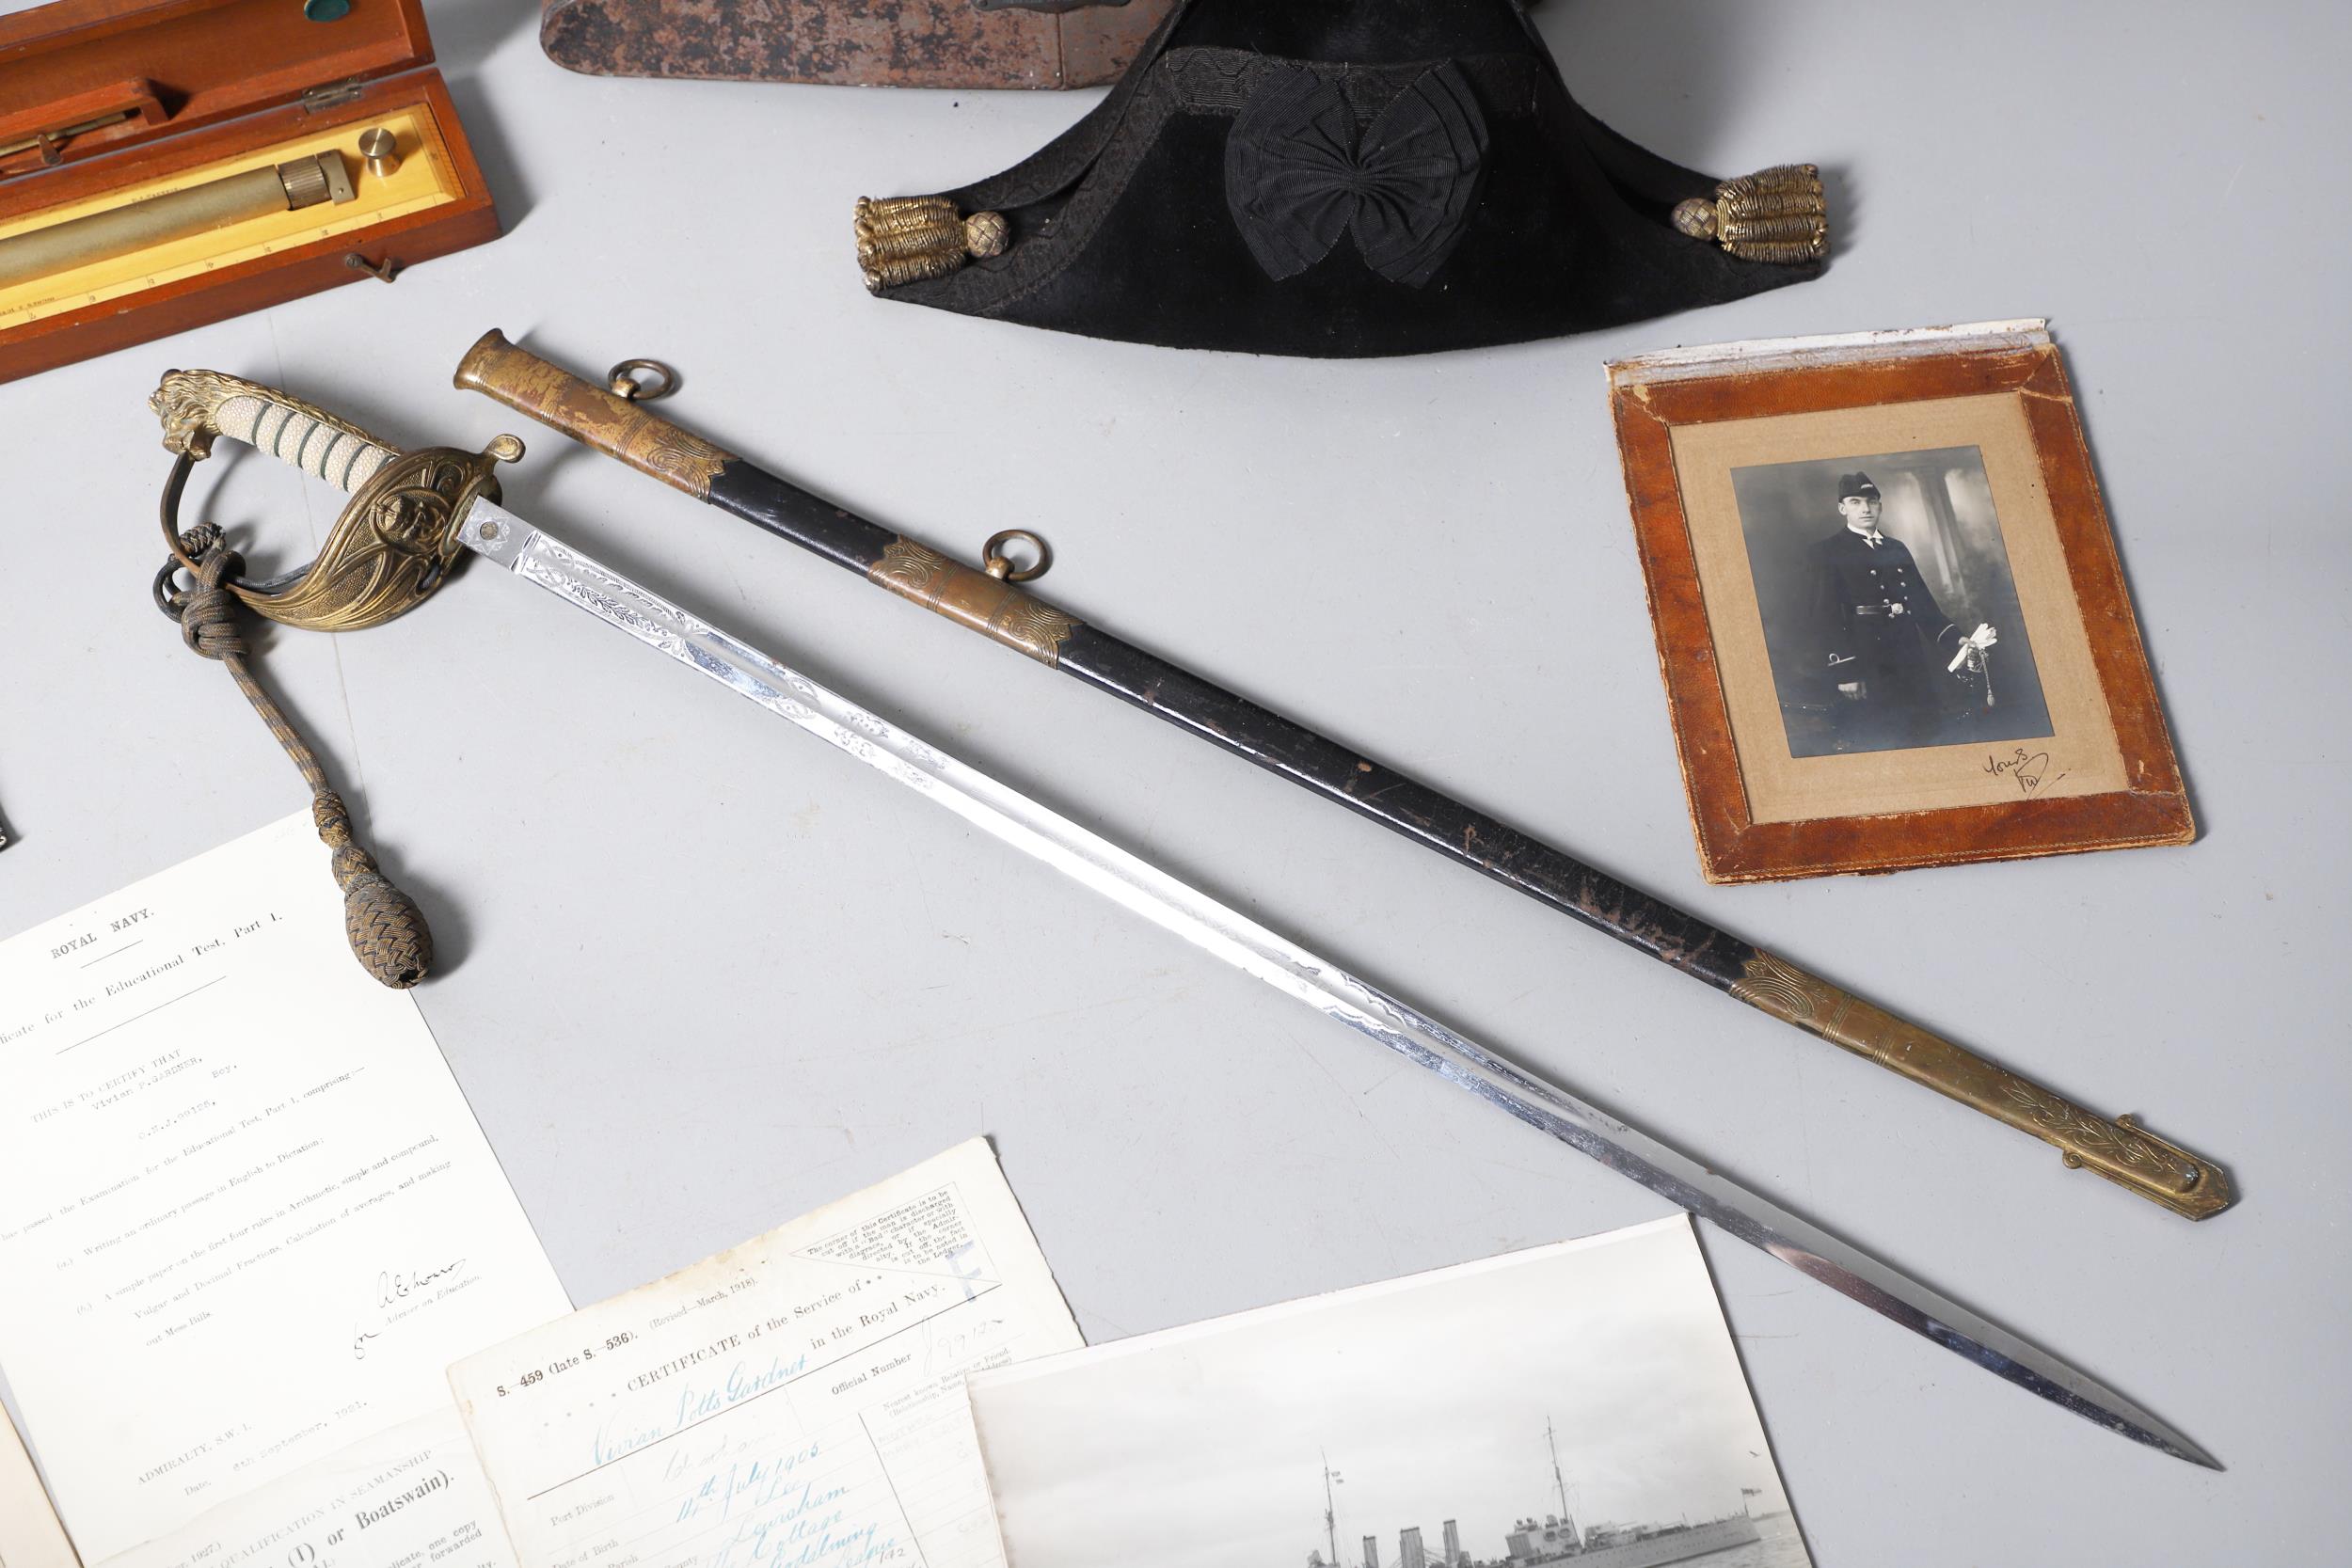 A GEORGE V NAVAL OFFICERS SWORD, HAT, PHOTOGRAPH ALBUM AND OTHER ITEMS THE PROPERTY OF VIVIAN POTTS. - Image 19 of 25